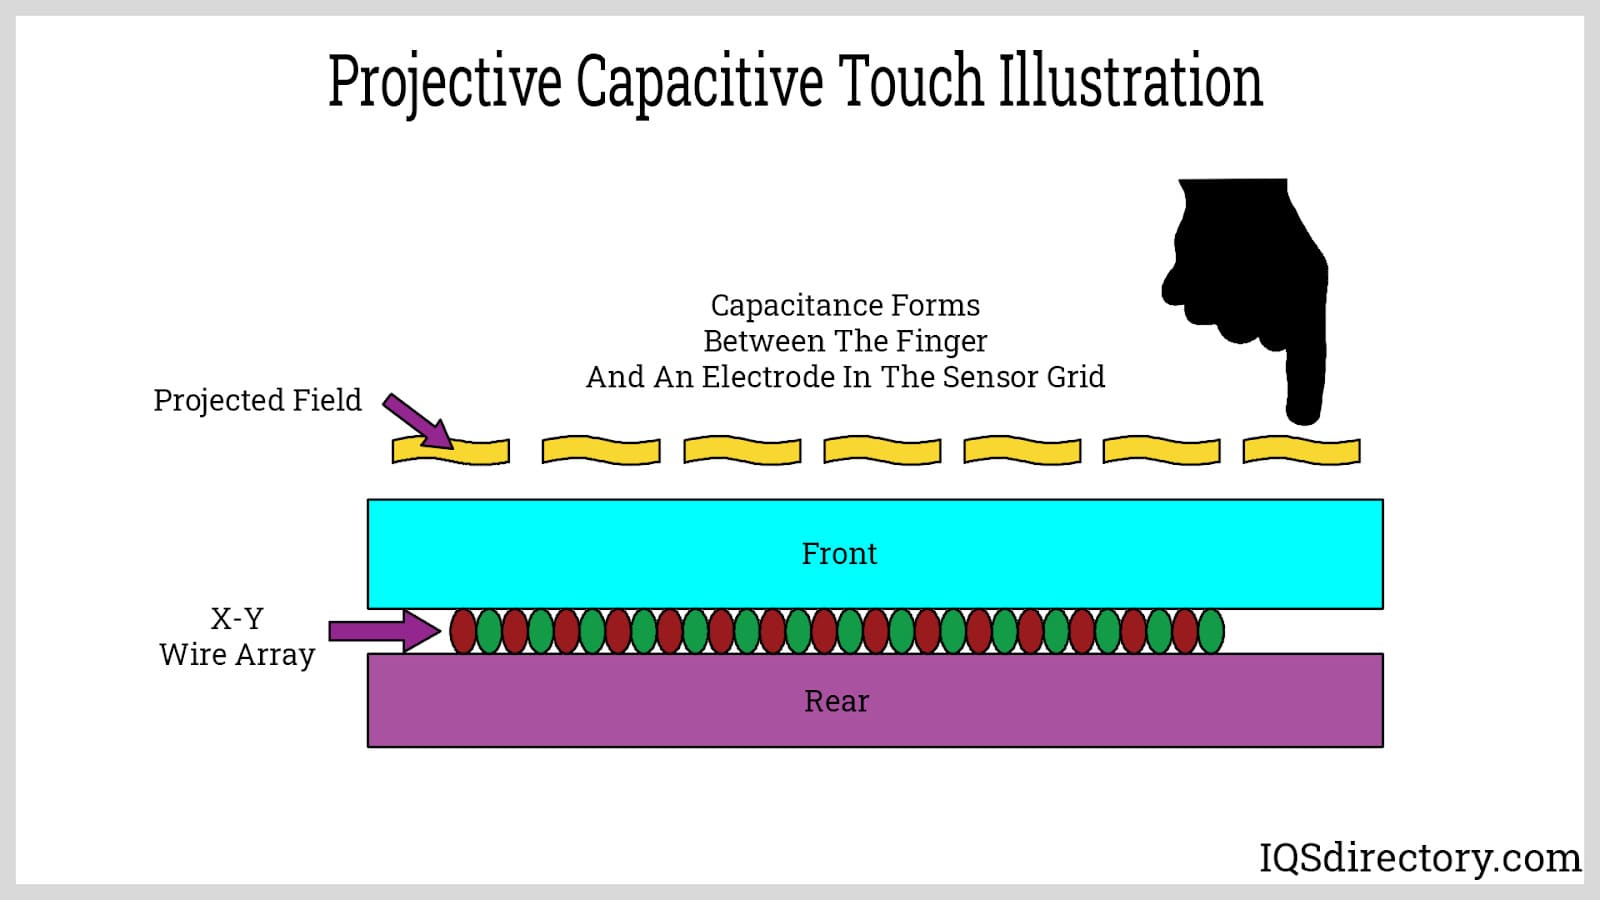 Projective Capacitive Touch Illustration